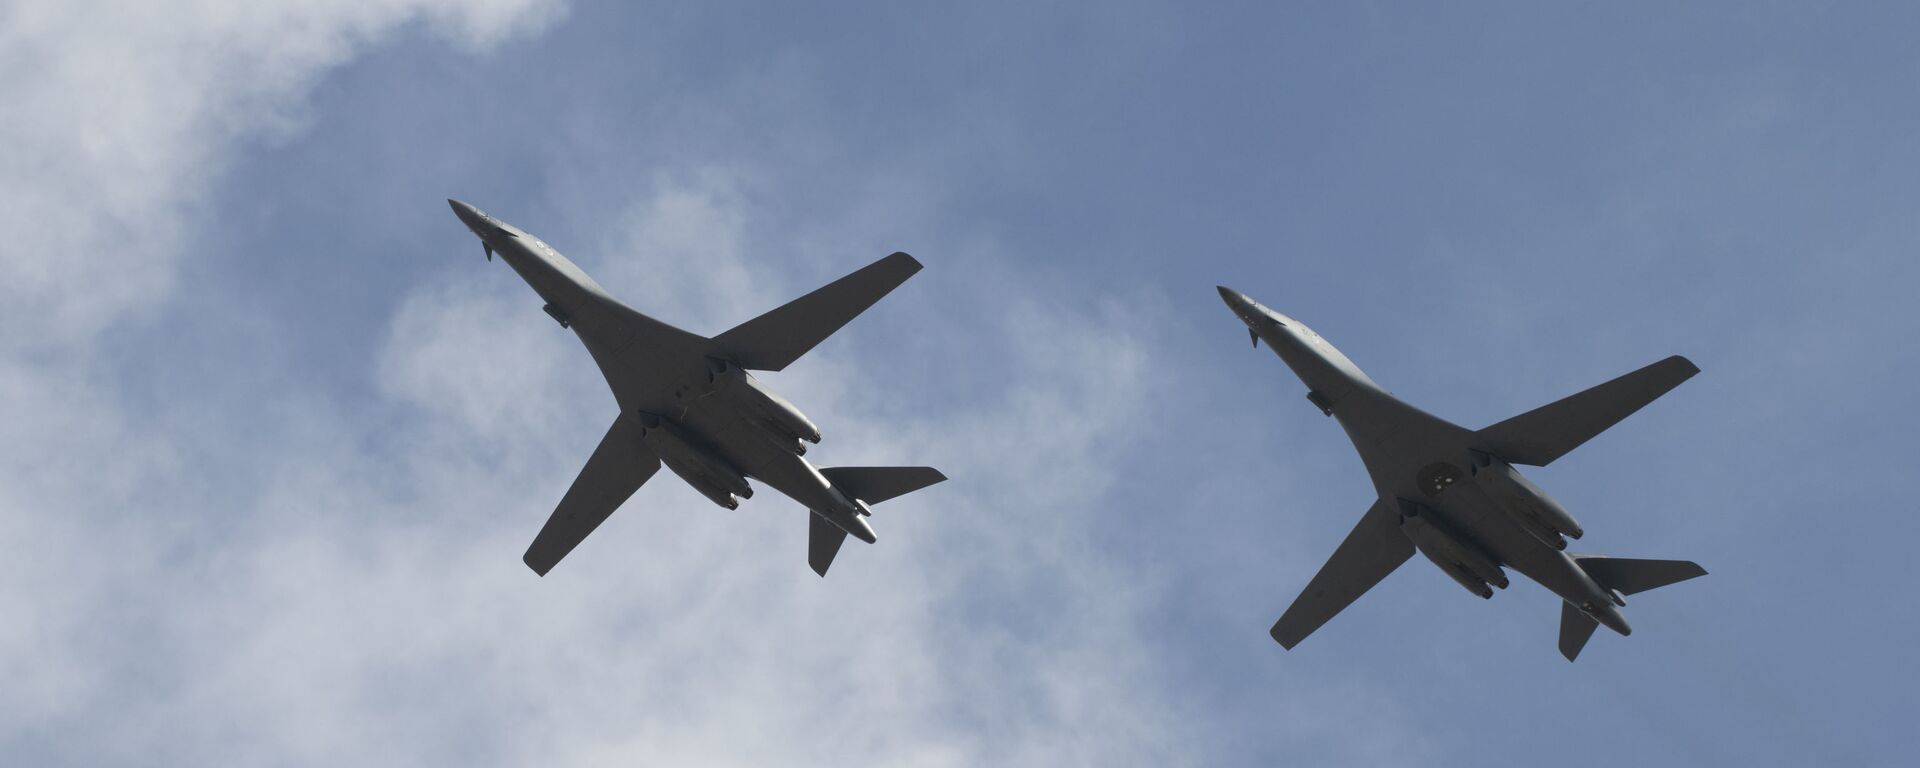 Two B-1B Lancers, assigned to the 28th Bomb Wing, Ellsworth Air Force Base, S.D., conduct a flyover before landing at Andersen AFB, Guam, July 17, 2020. The Bomber Task Force is deployed to Andersen AFB in support of Pacific Air Forces’ training efforts with allies, partners and joint forces. (U.S. Air Force Photo by Airman 1st Class Christina Bennett) - Sputnik International, 1920, 20.06.2023